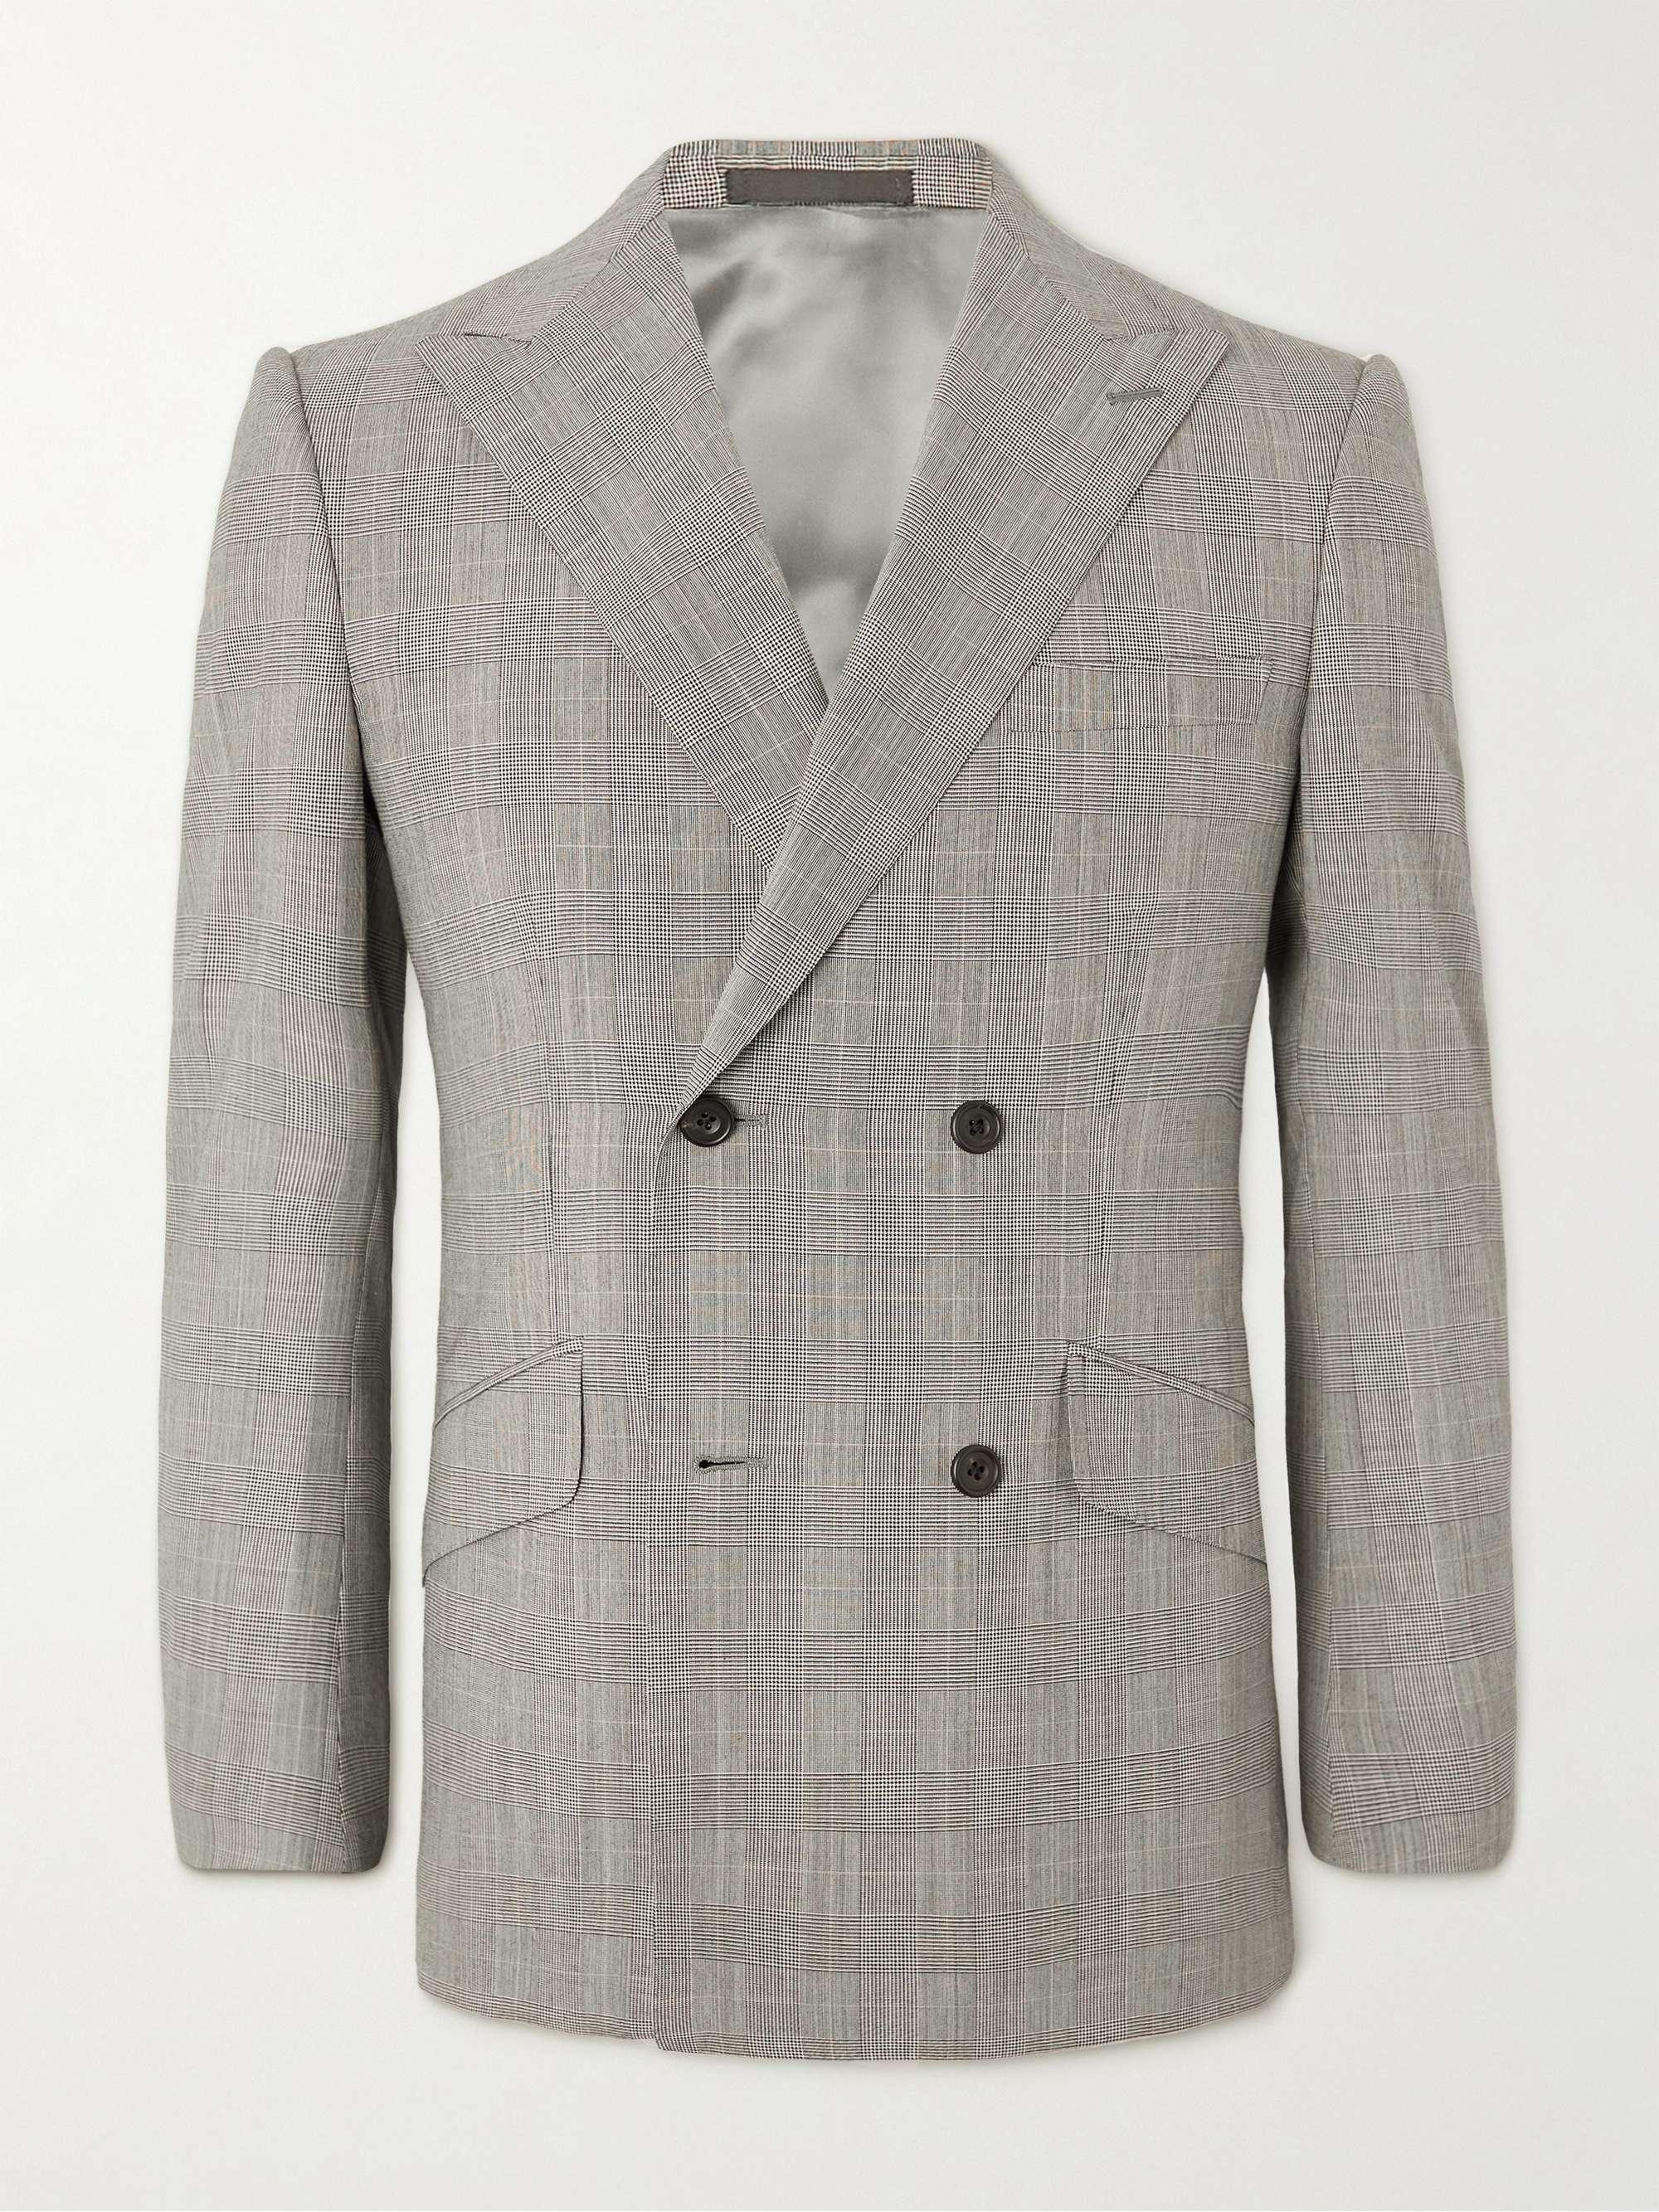 KINGSMAN Double-Breasted Prince of Wales Checked Wool Blazer